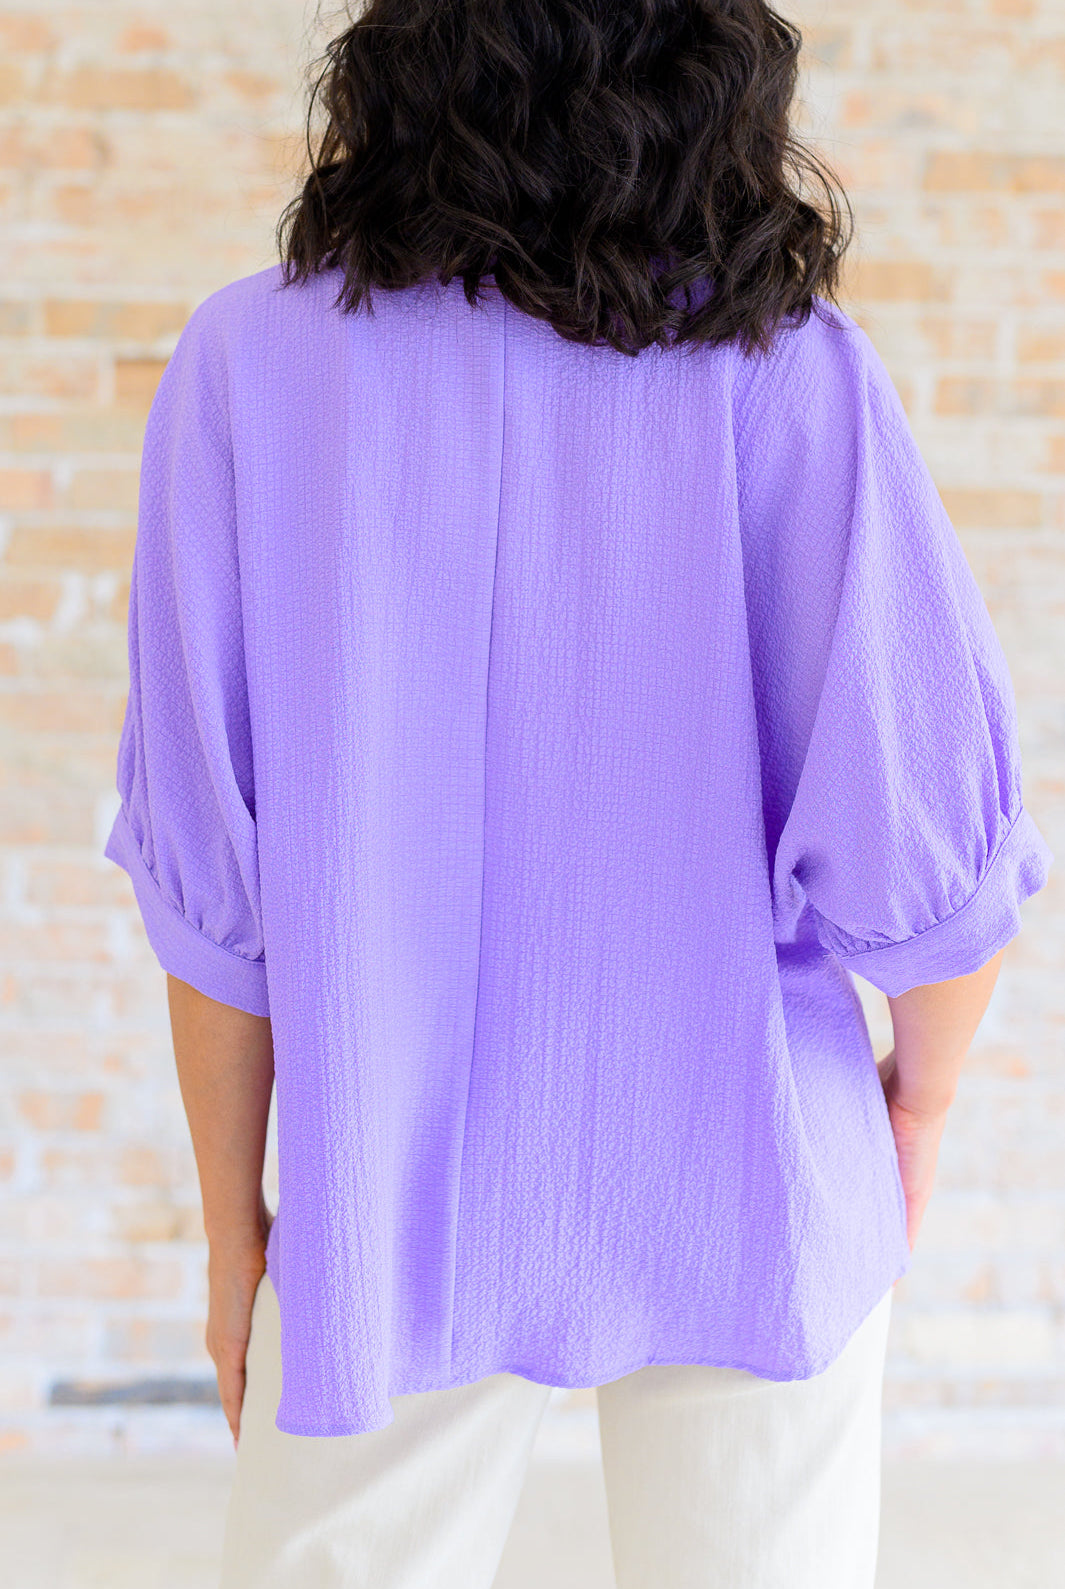 Up For Anything V-Neck Blouse in Lavender-Short Sleeves-Ave Shops-Urban Threadz Boutique, Women's Fashion Boutique in Saugatuck, MI